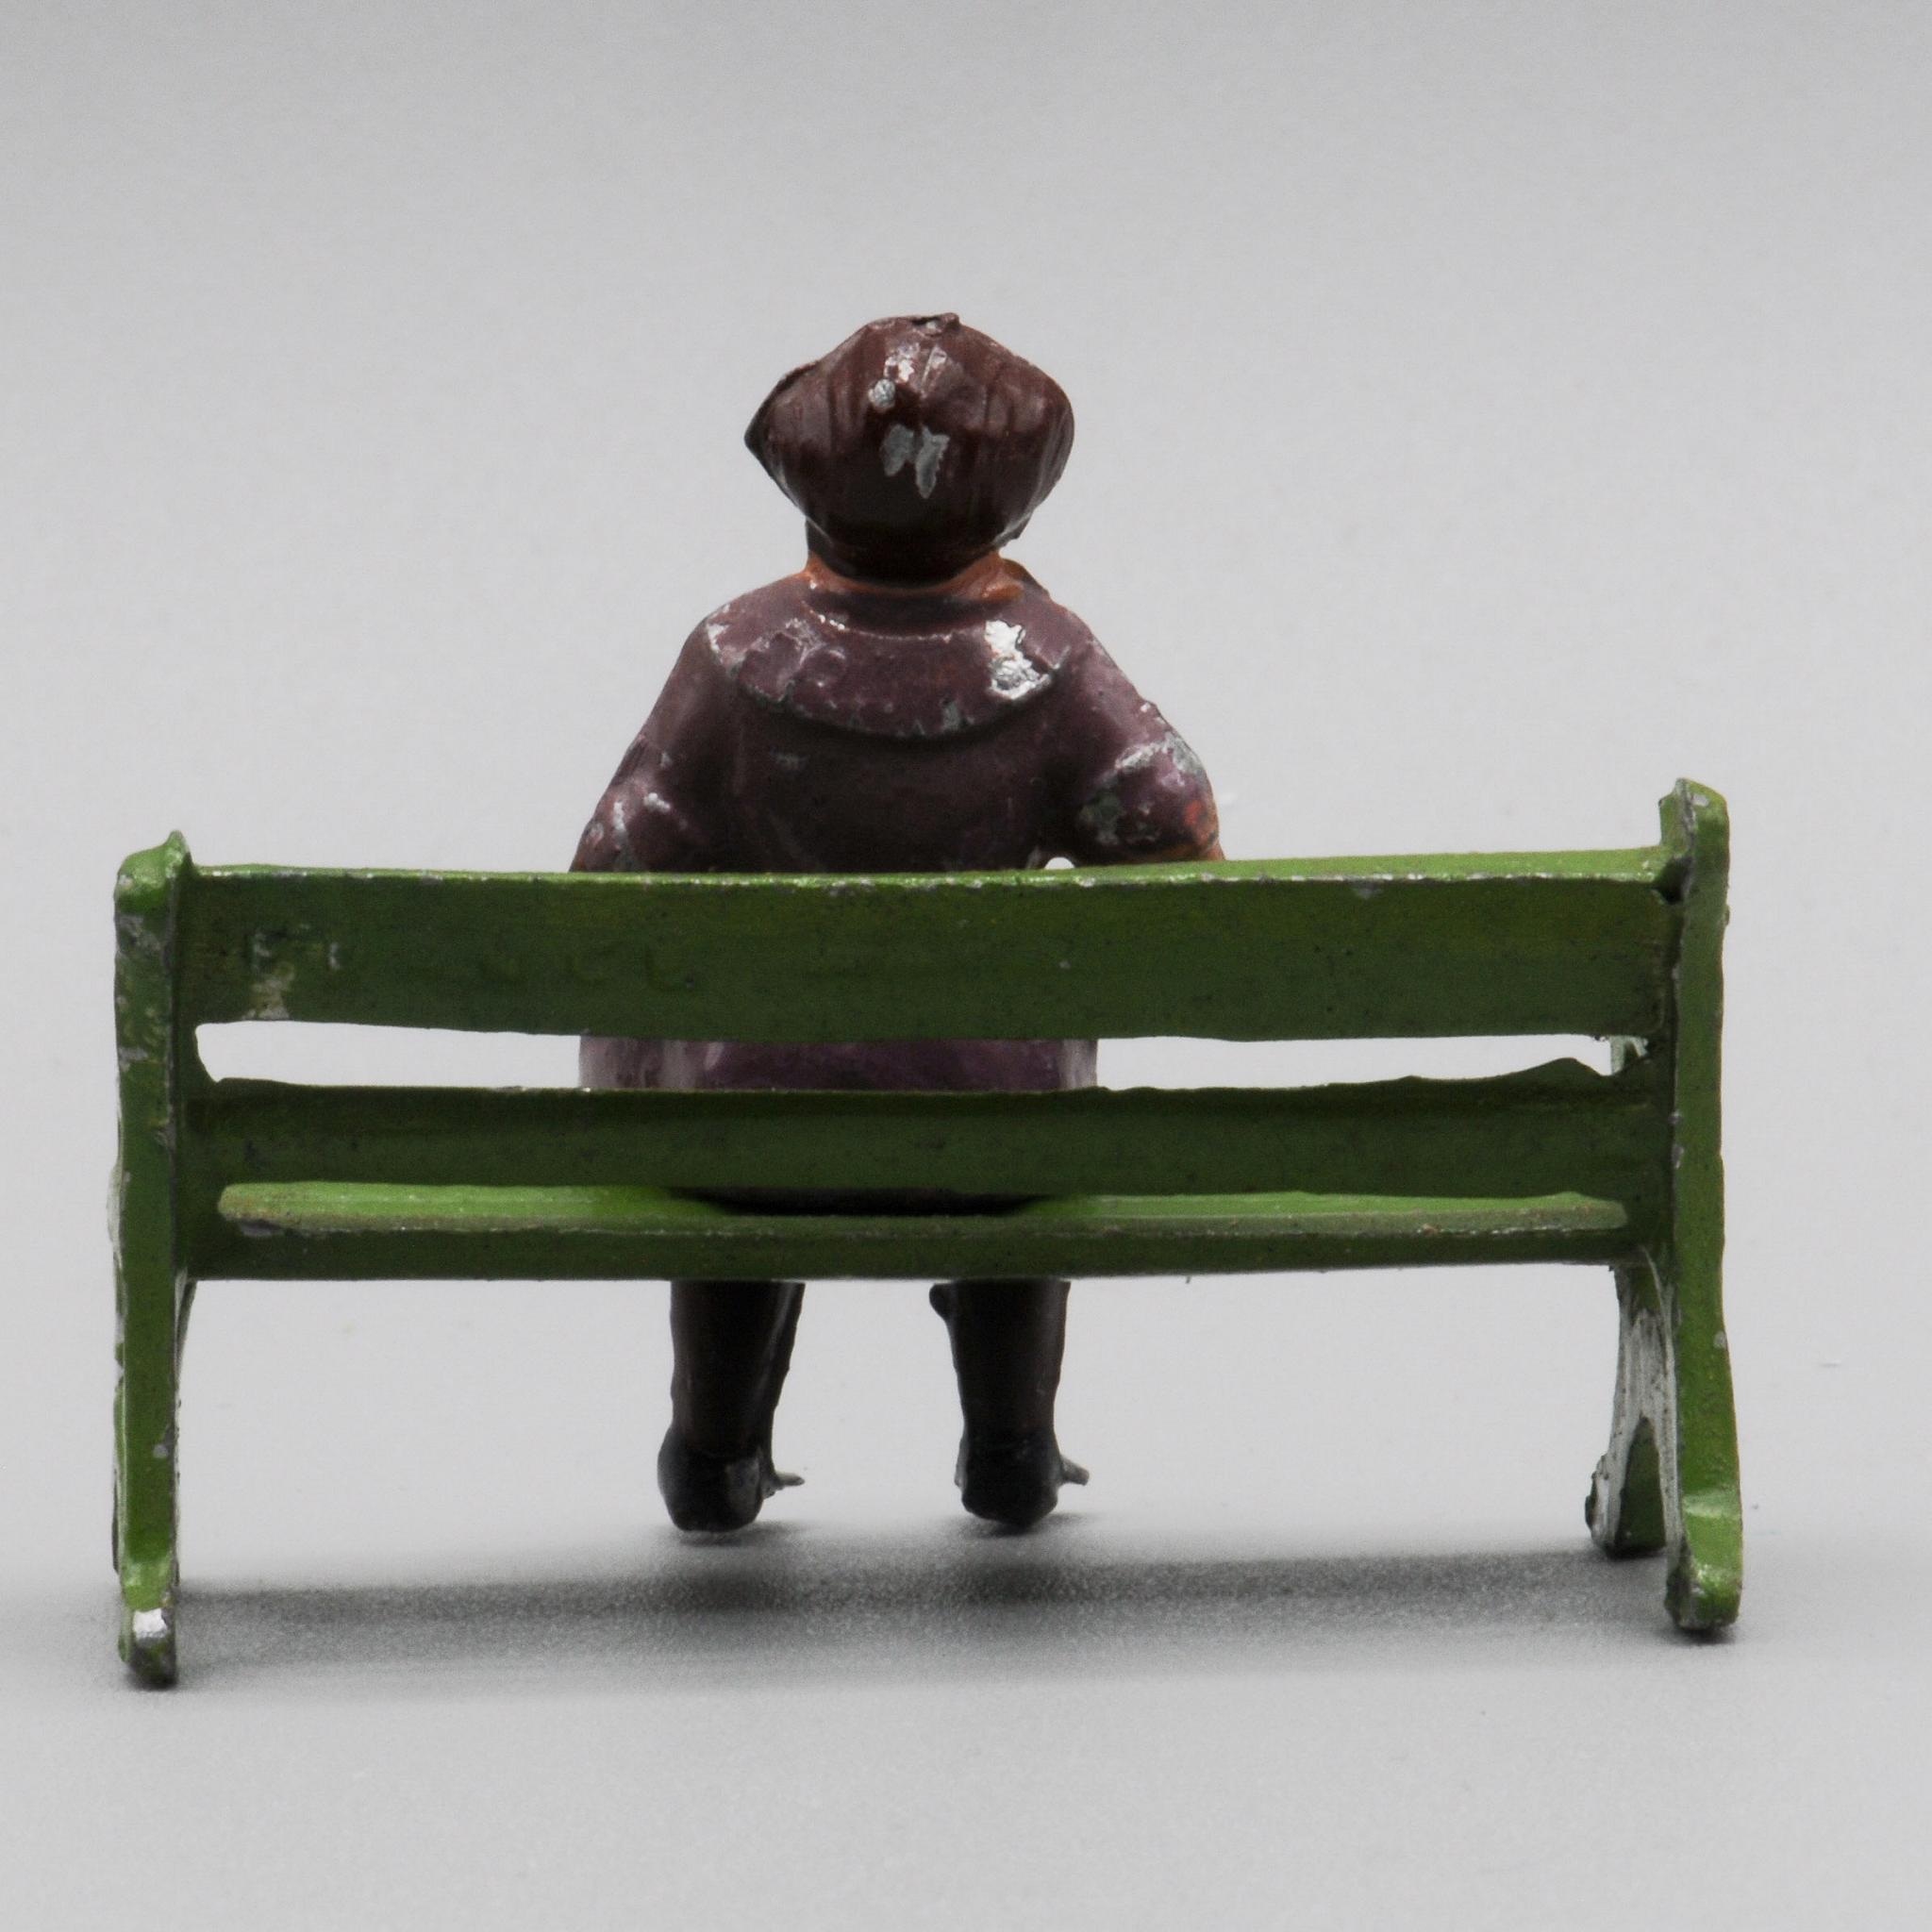 Woman+on+Bench+Vintage+Hollowcast+Lead+Farm+Toy+Made+in+France picture 2